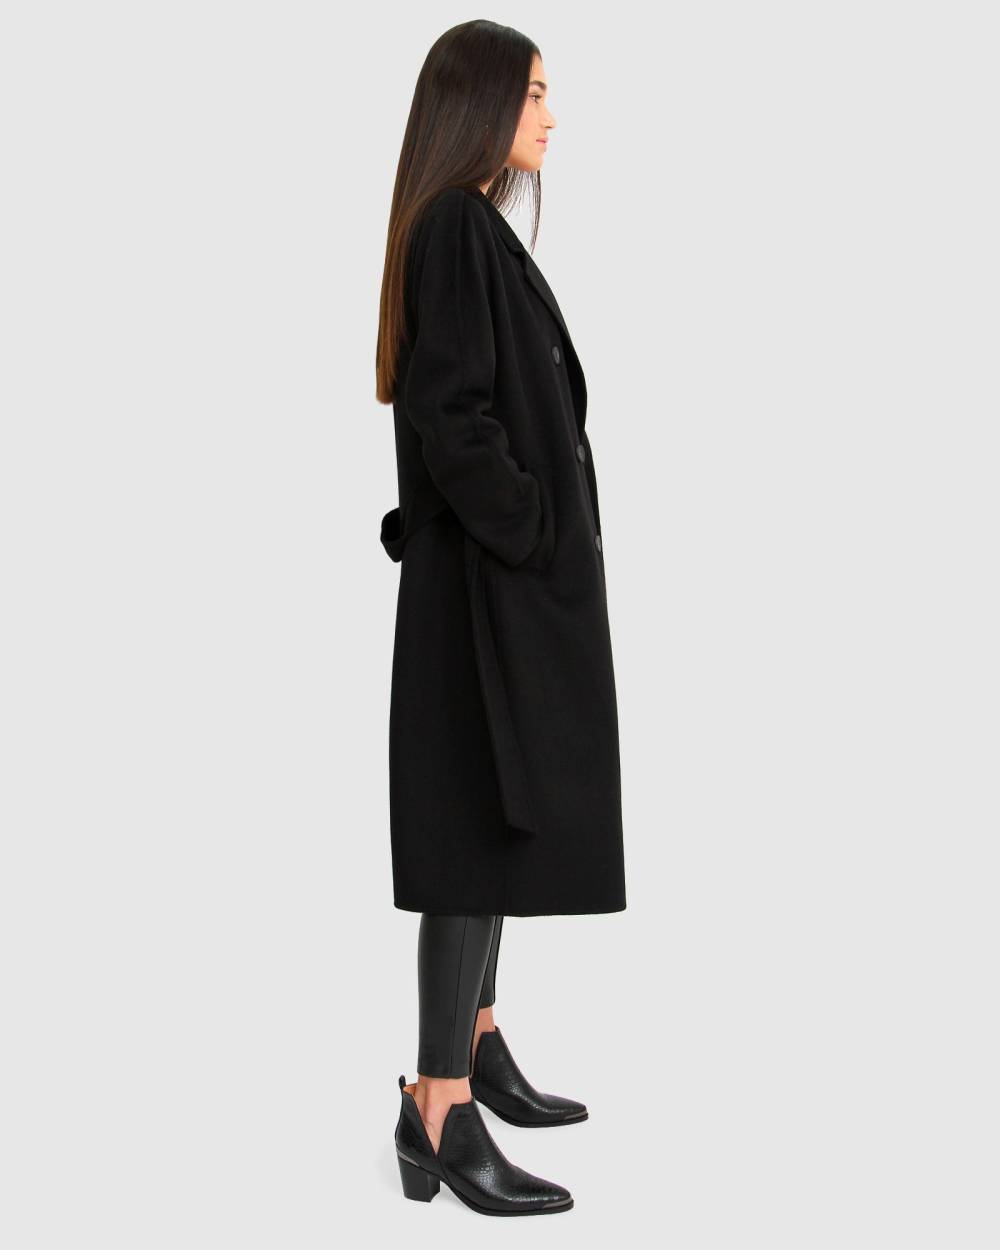 Belle & Bloom Boss Girl Double Breasted Lined Wool Coat - Rwco